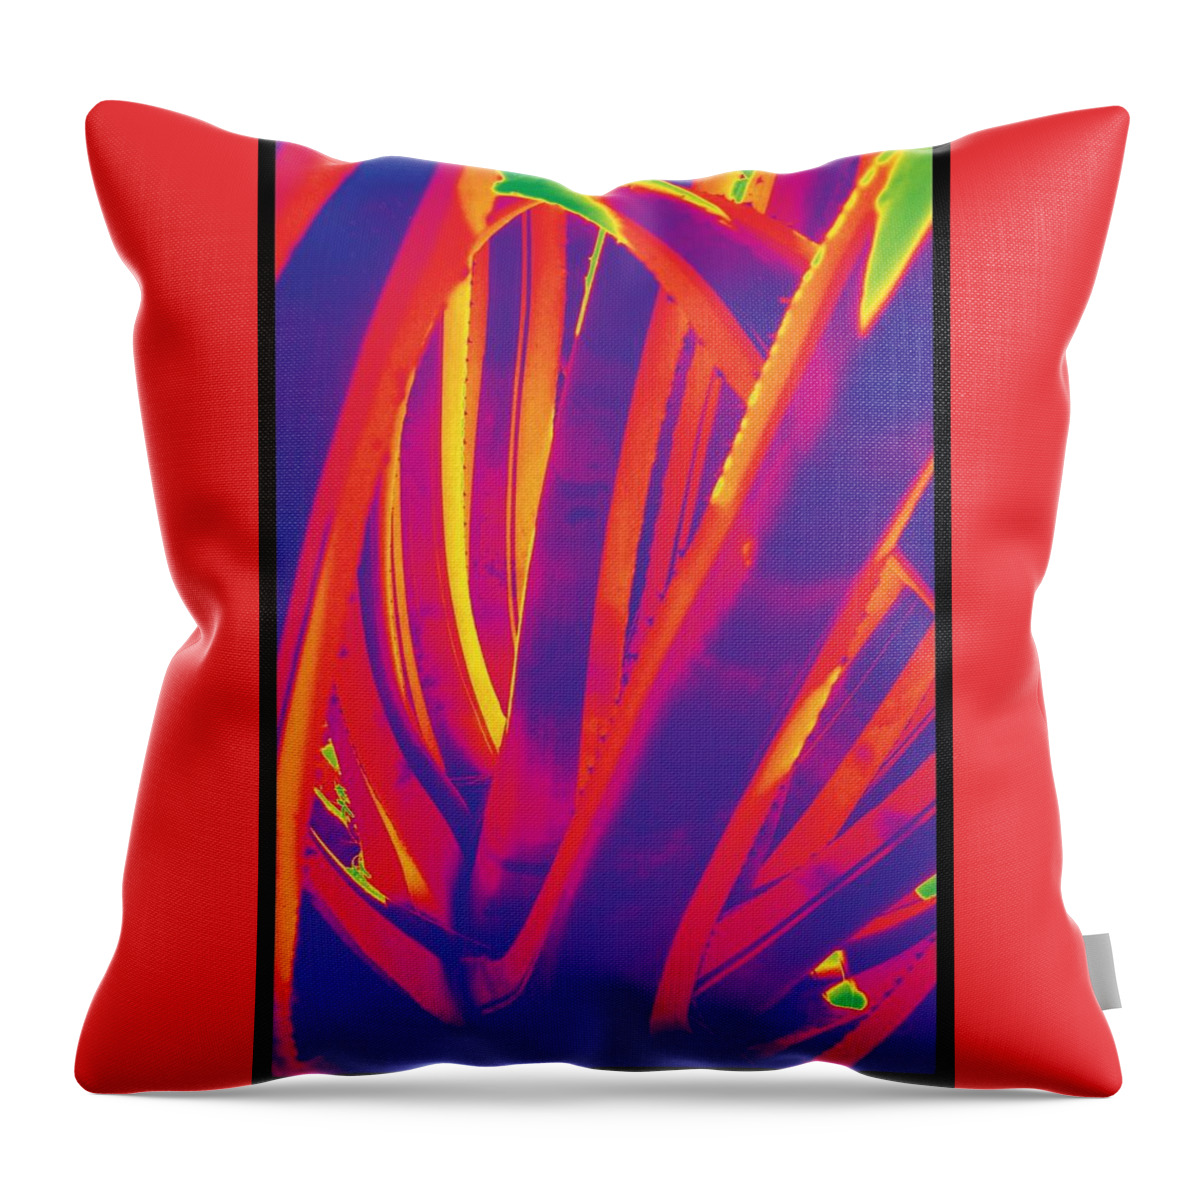 Cactus Throw Pillow featuring the photograph Bright Cactus by Vivian Aumond